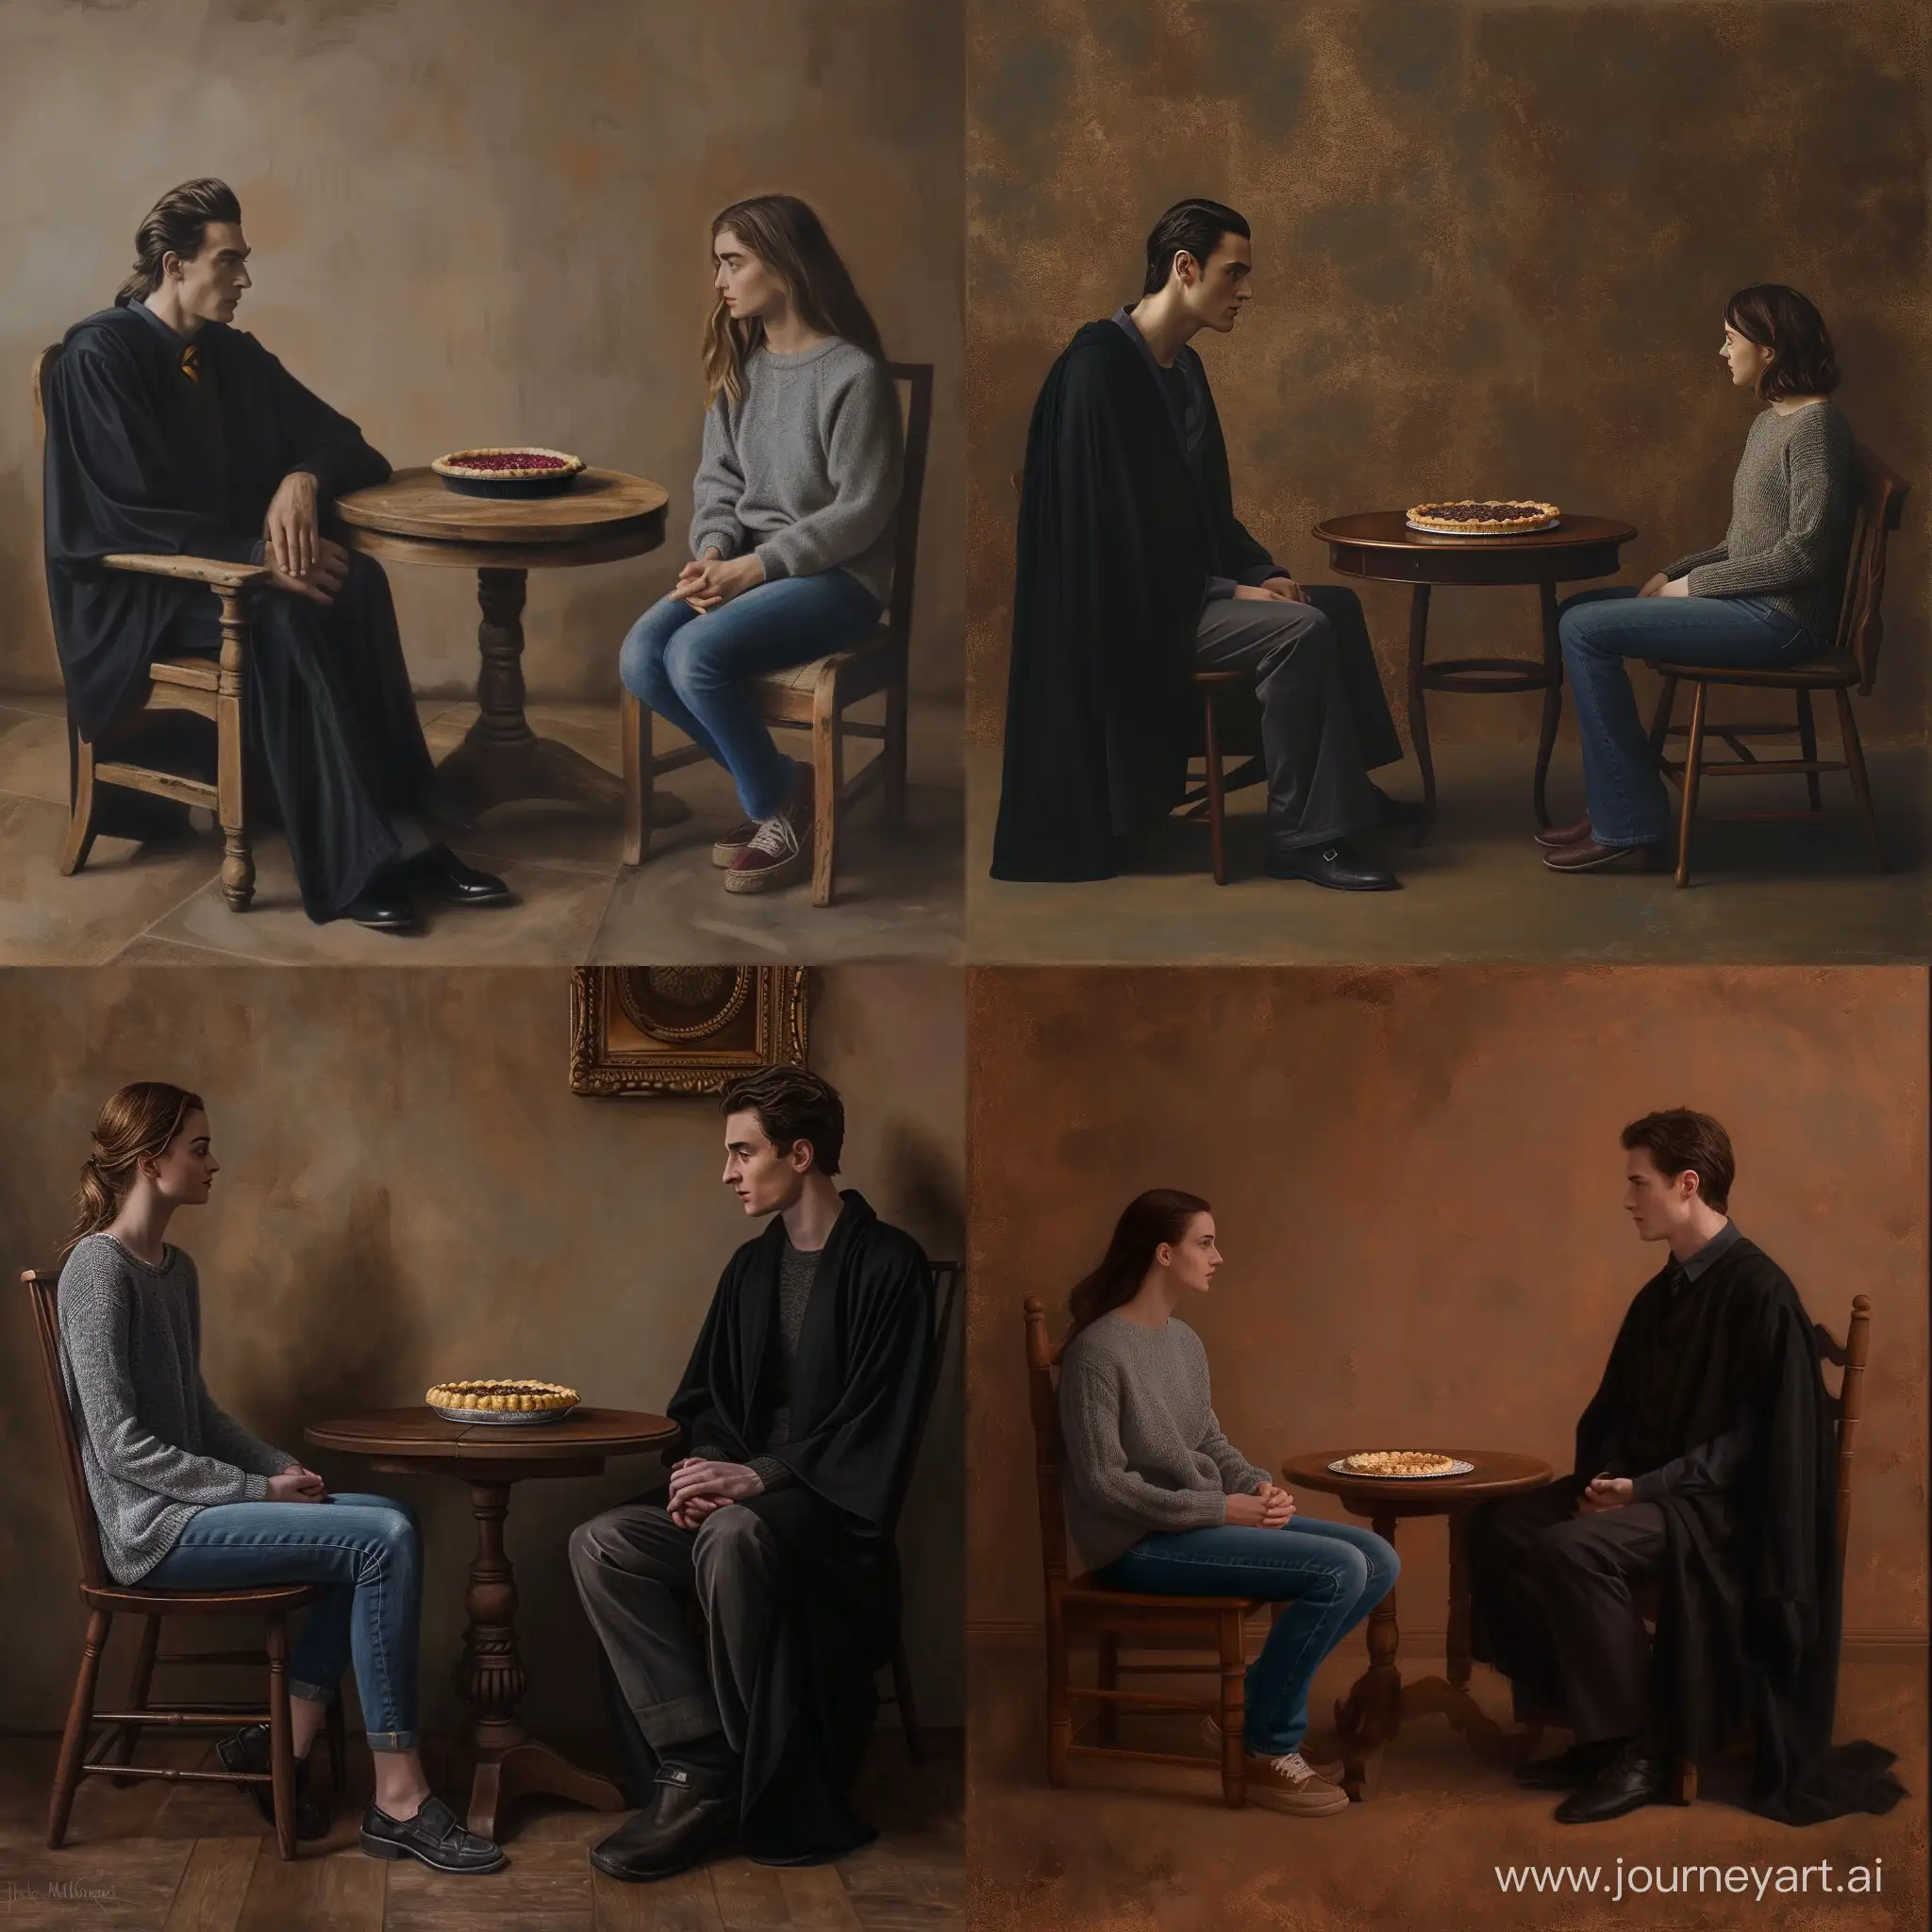 Draco Malfoy is sitting in a chair opposite Hermione Granger. He is wearing a black robe, a dark shirt and trousers. Hermione is wearing a grey sweater and blue jeans. They are sitting opposite each other, there is a pie on the table. The brown tones of the room. Photorealism style.